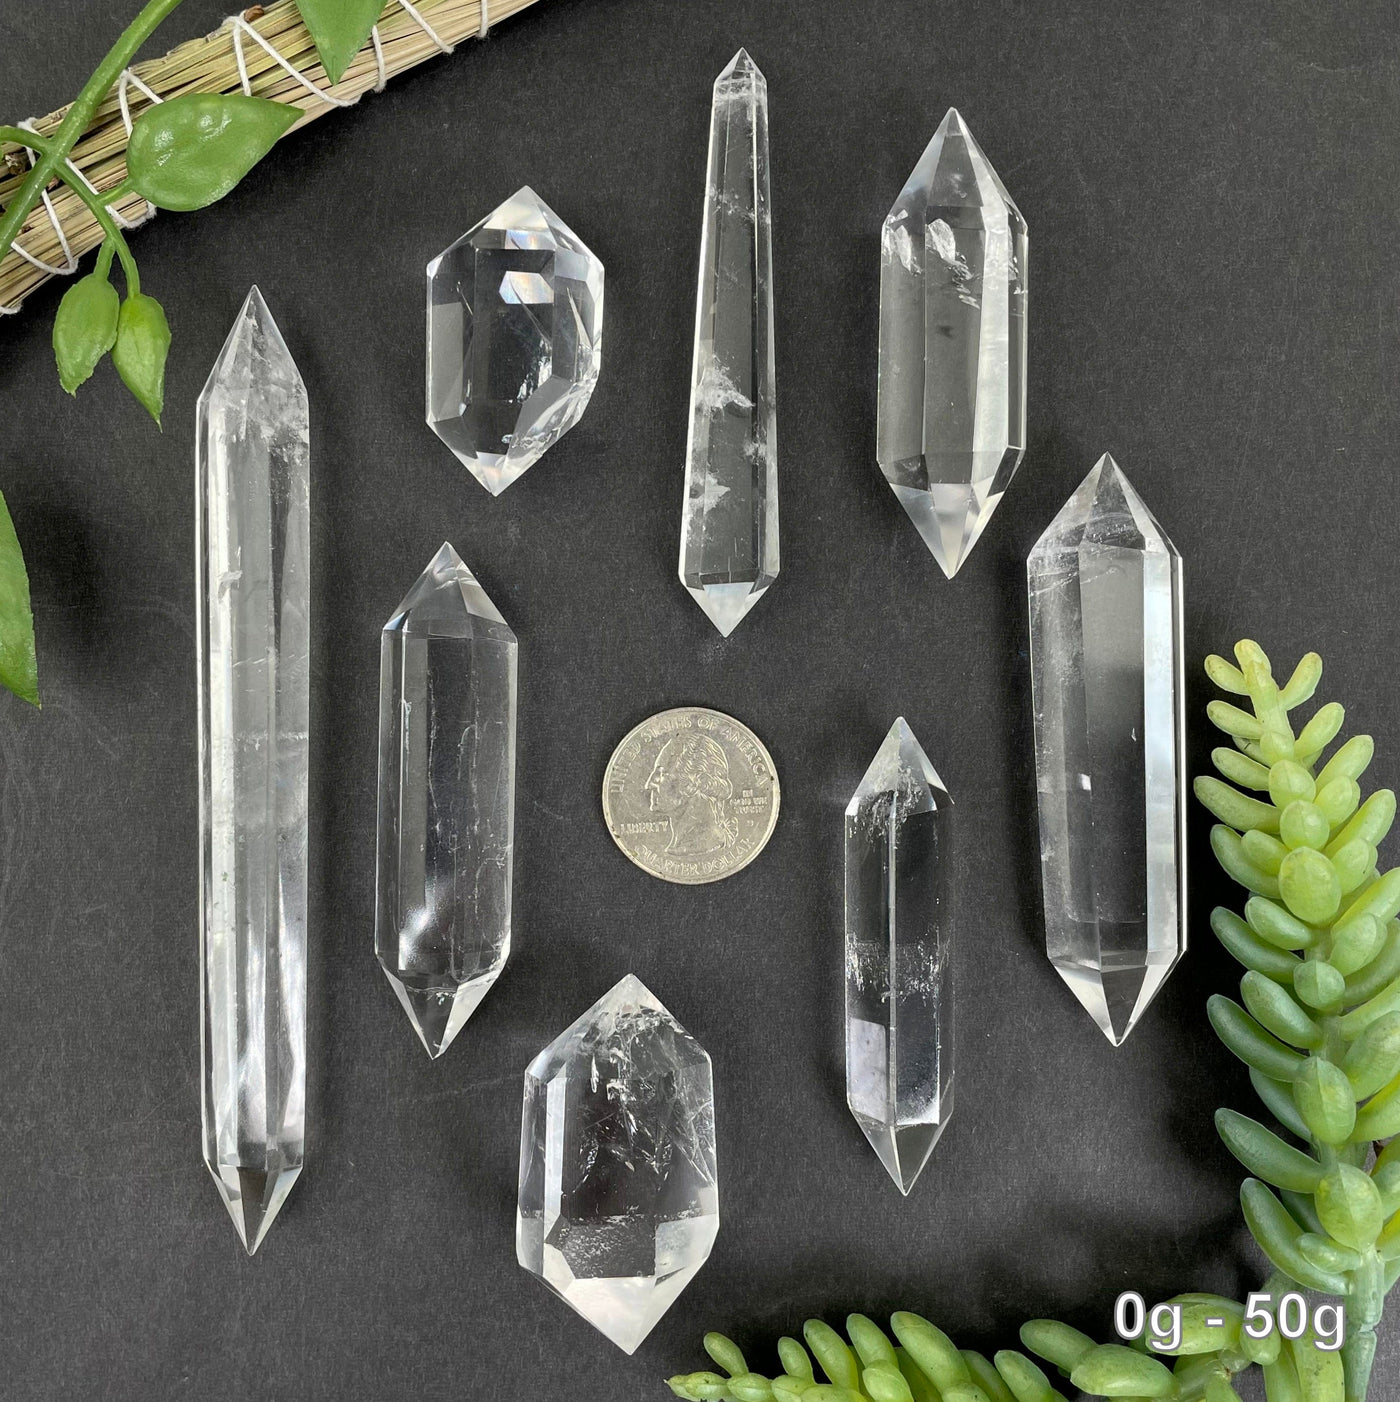 many 0g - 50g crystal quartz points on black background with quarter for size reference